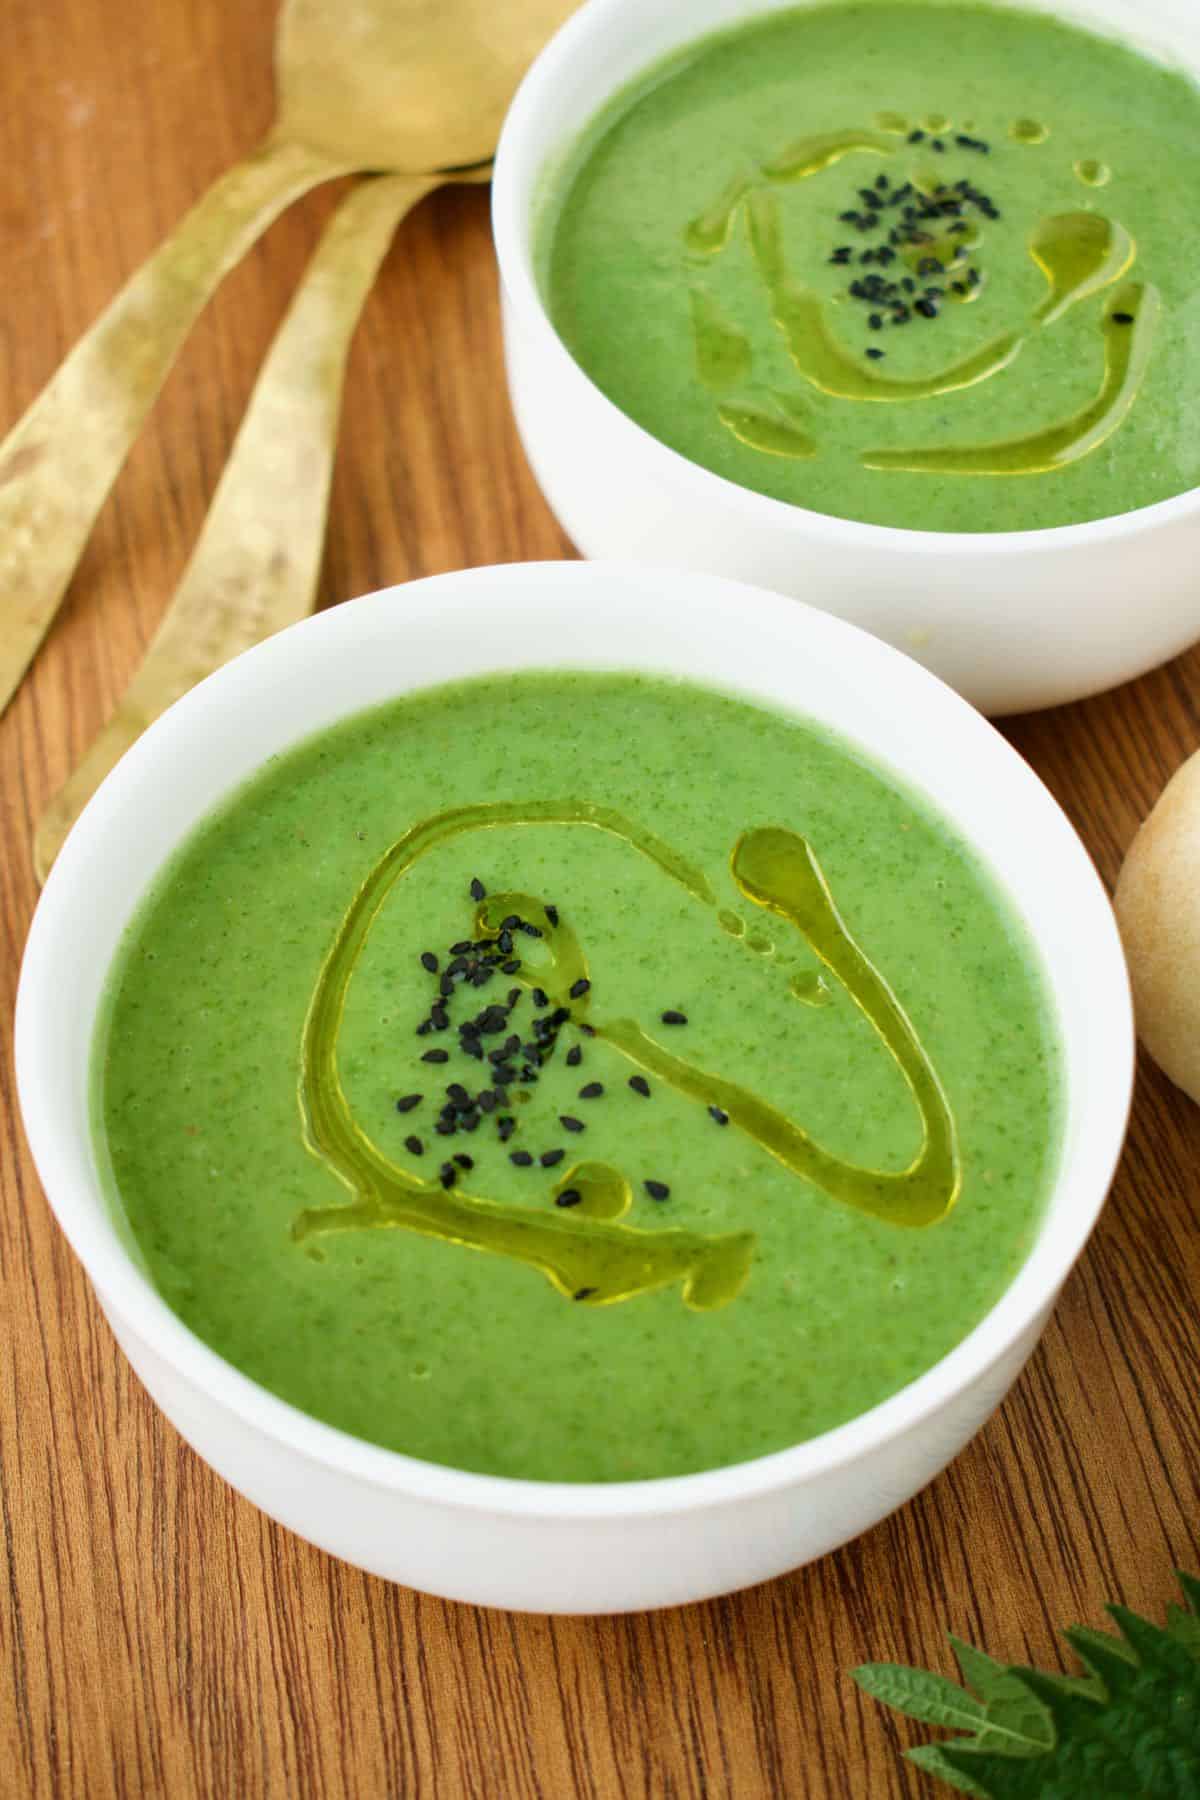 Two white bowls containing bright green nettle soup.